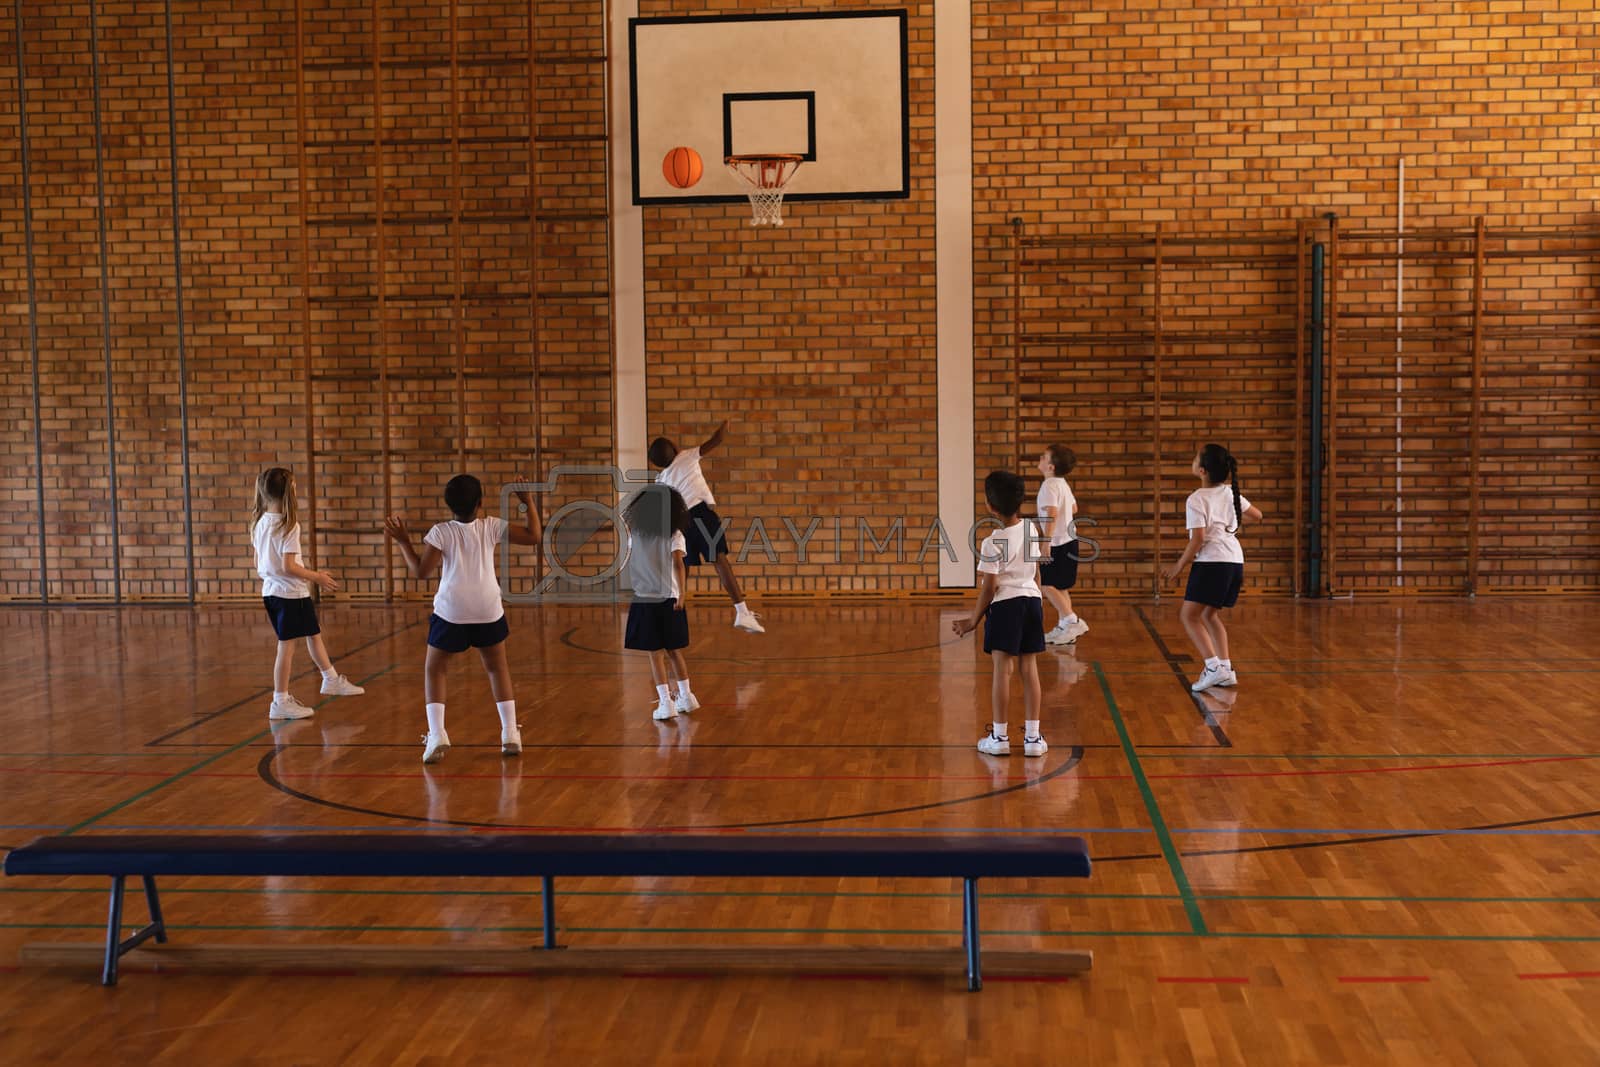 Royalty free image of Schoolkids playing basketball at basketball court by Wavebreakmedia